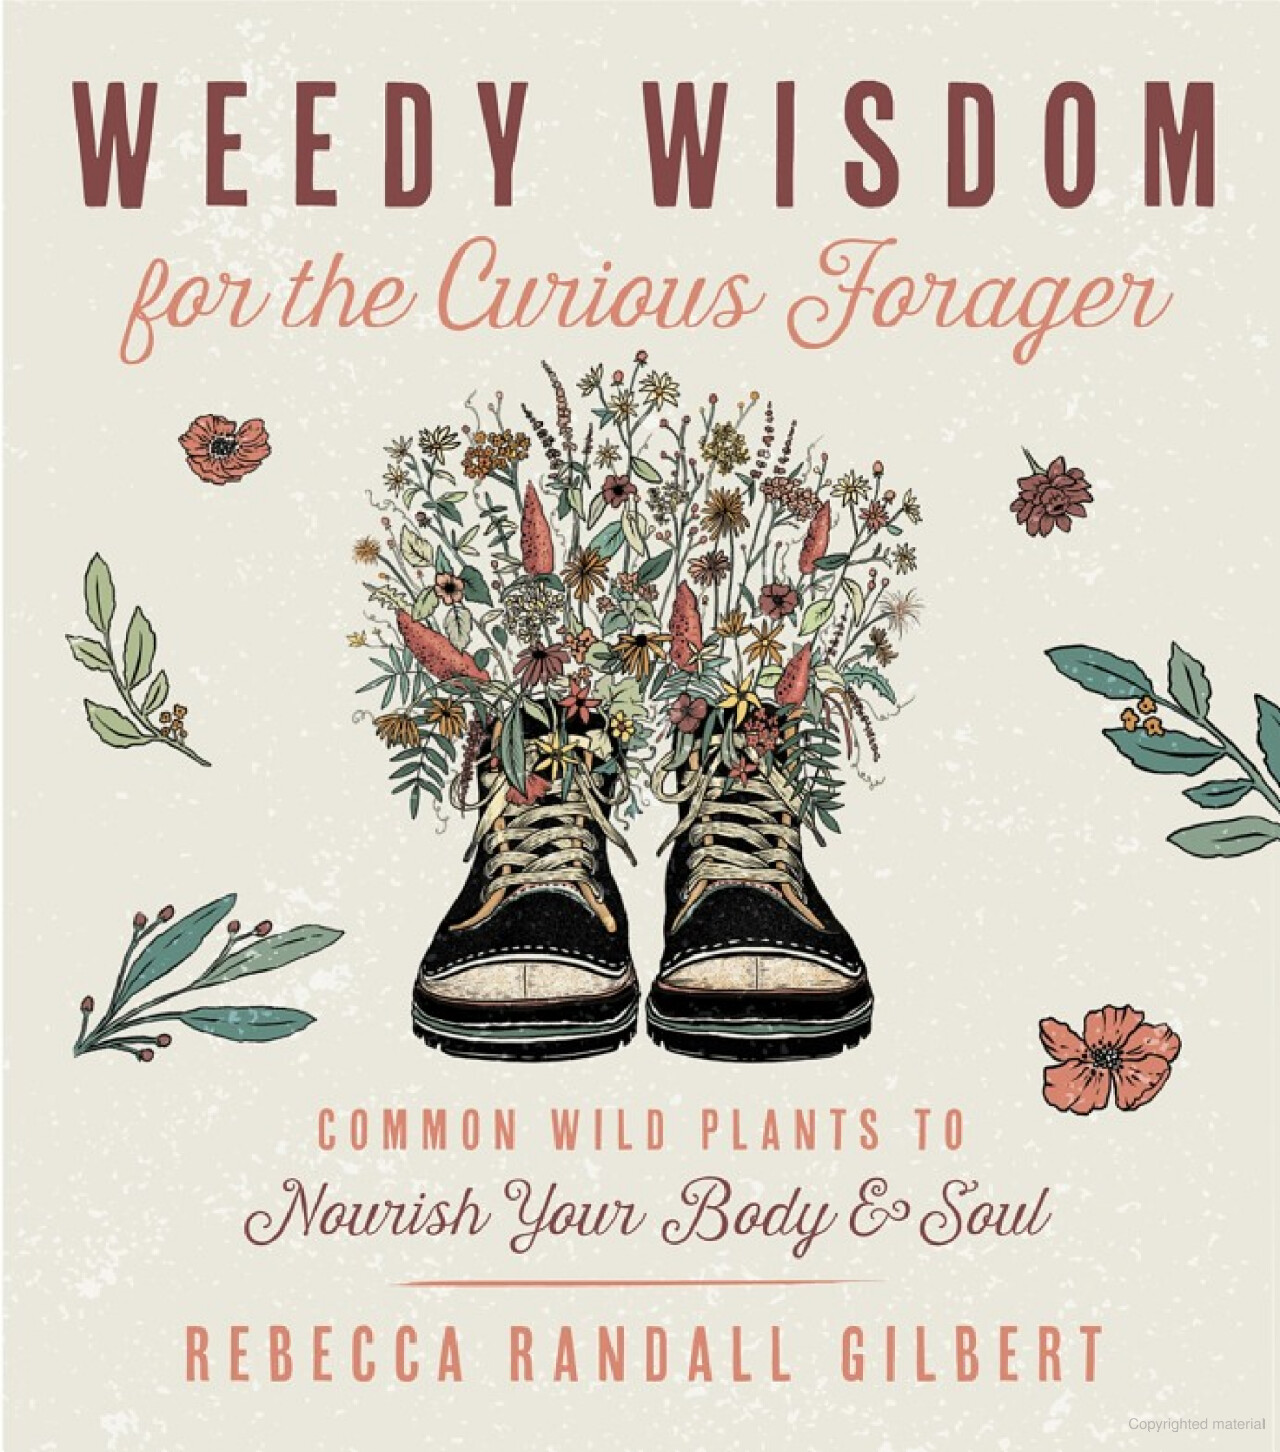 Weedy Wisdom for Curious Forager by Rebecca Randall Gilbert